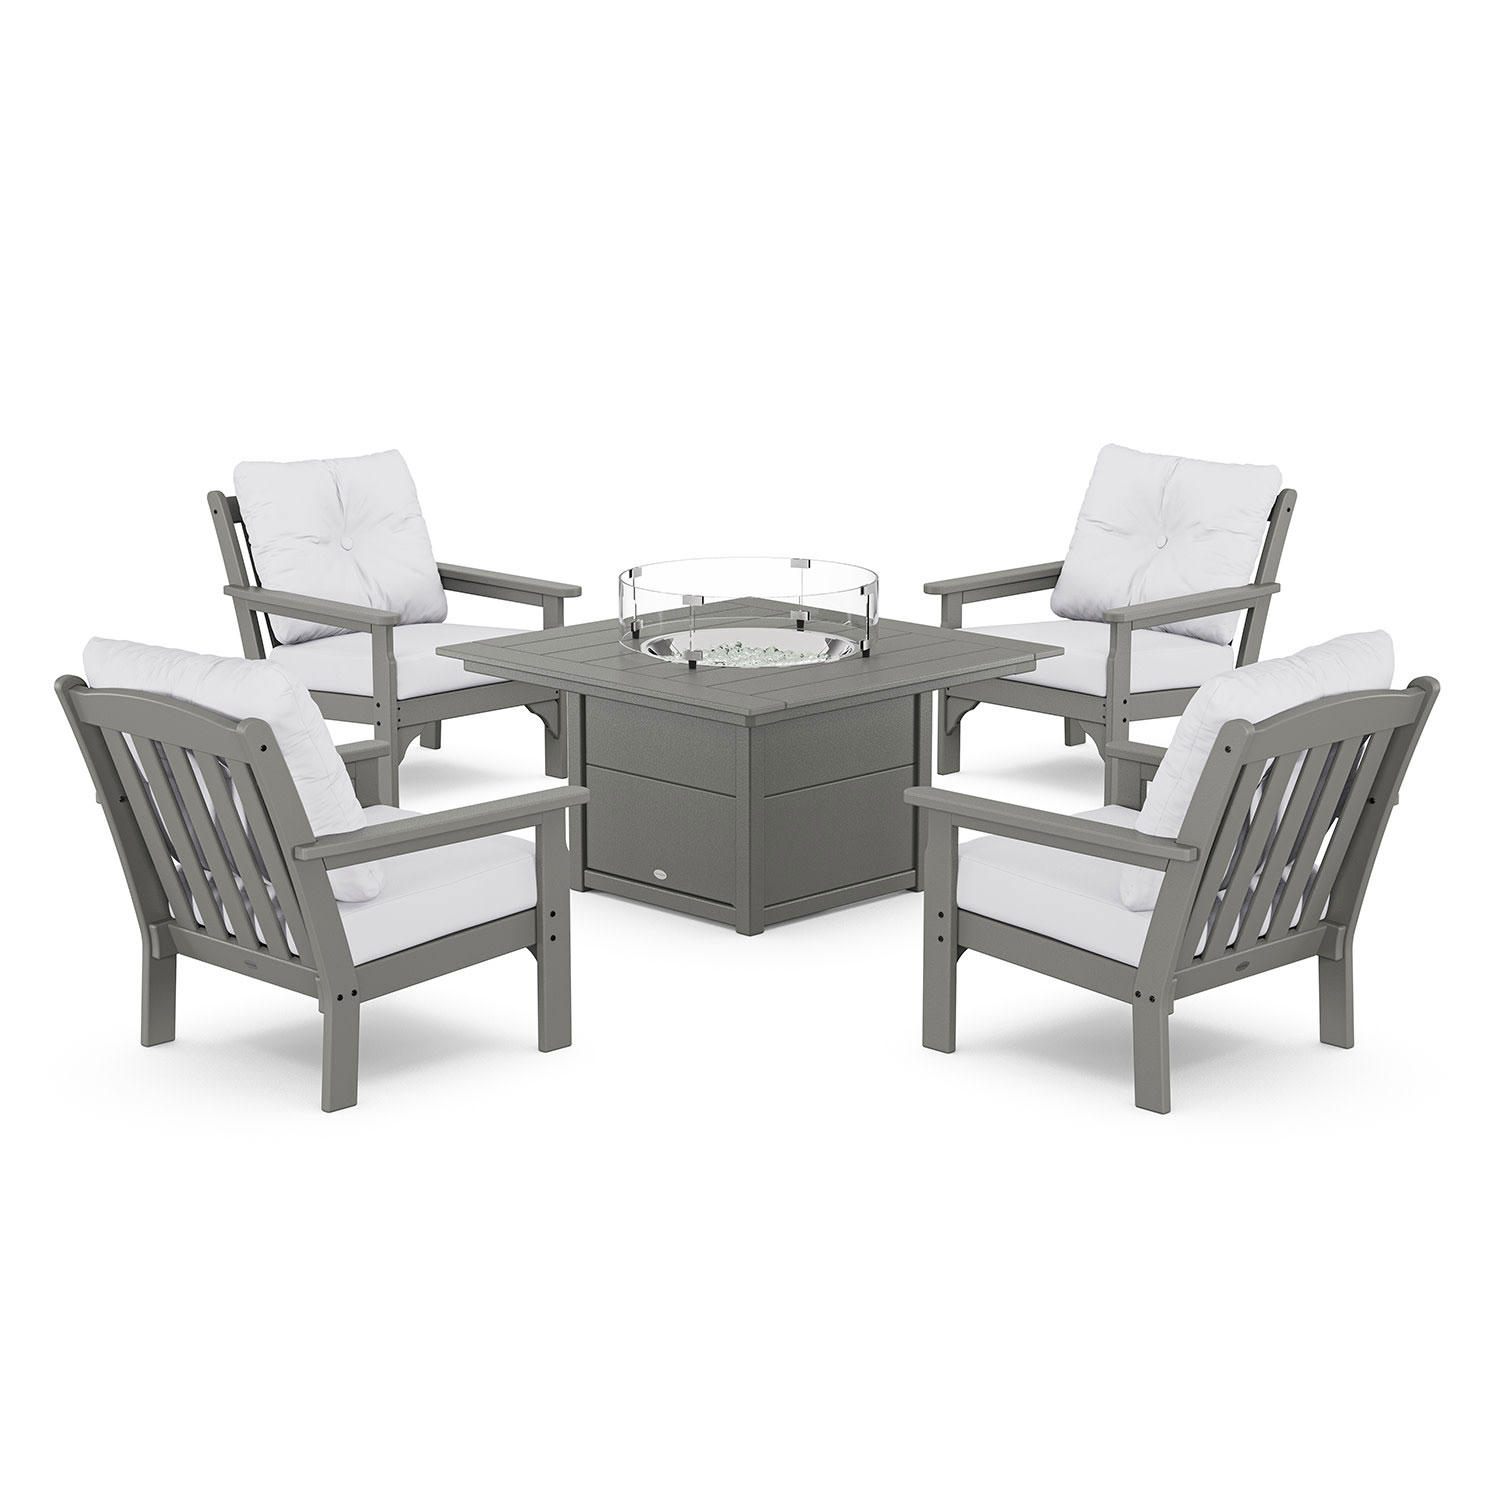 POLYWOOD Gulf Shores 5-Piece Deep Seating Firepit Set (Slate Grey/Natural)